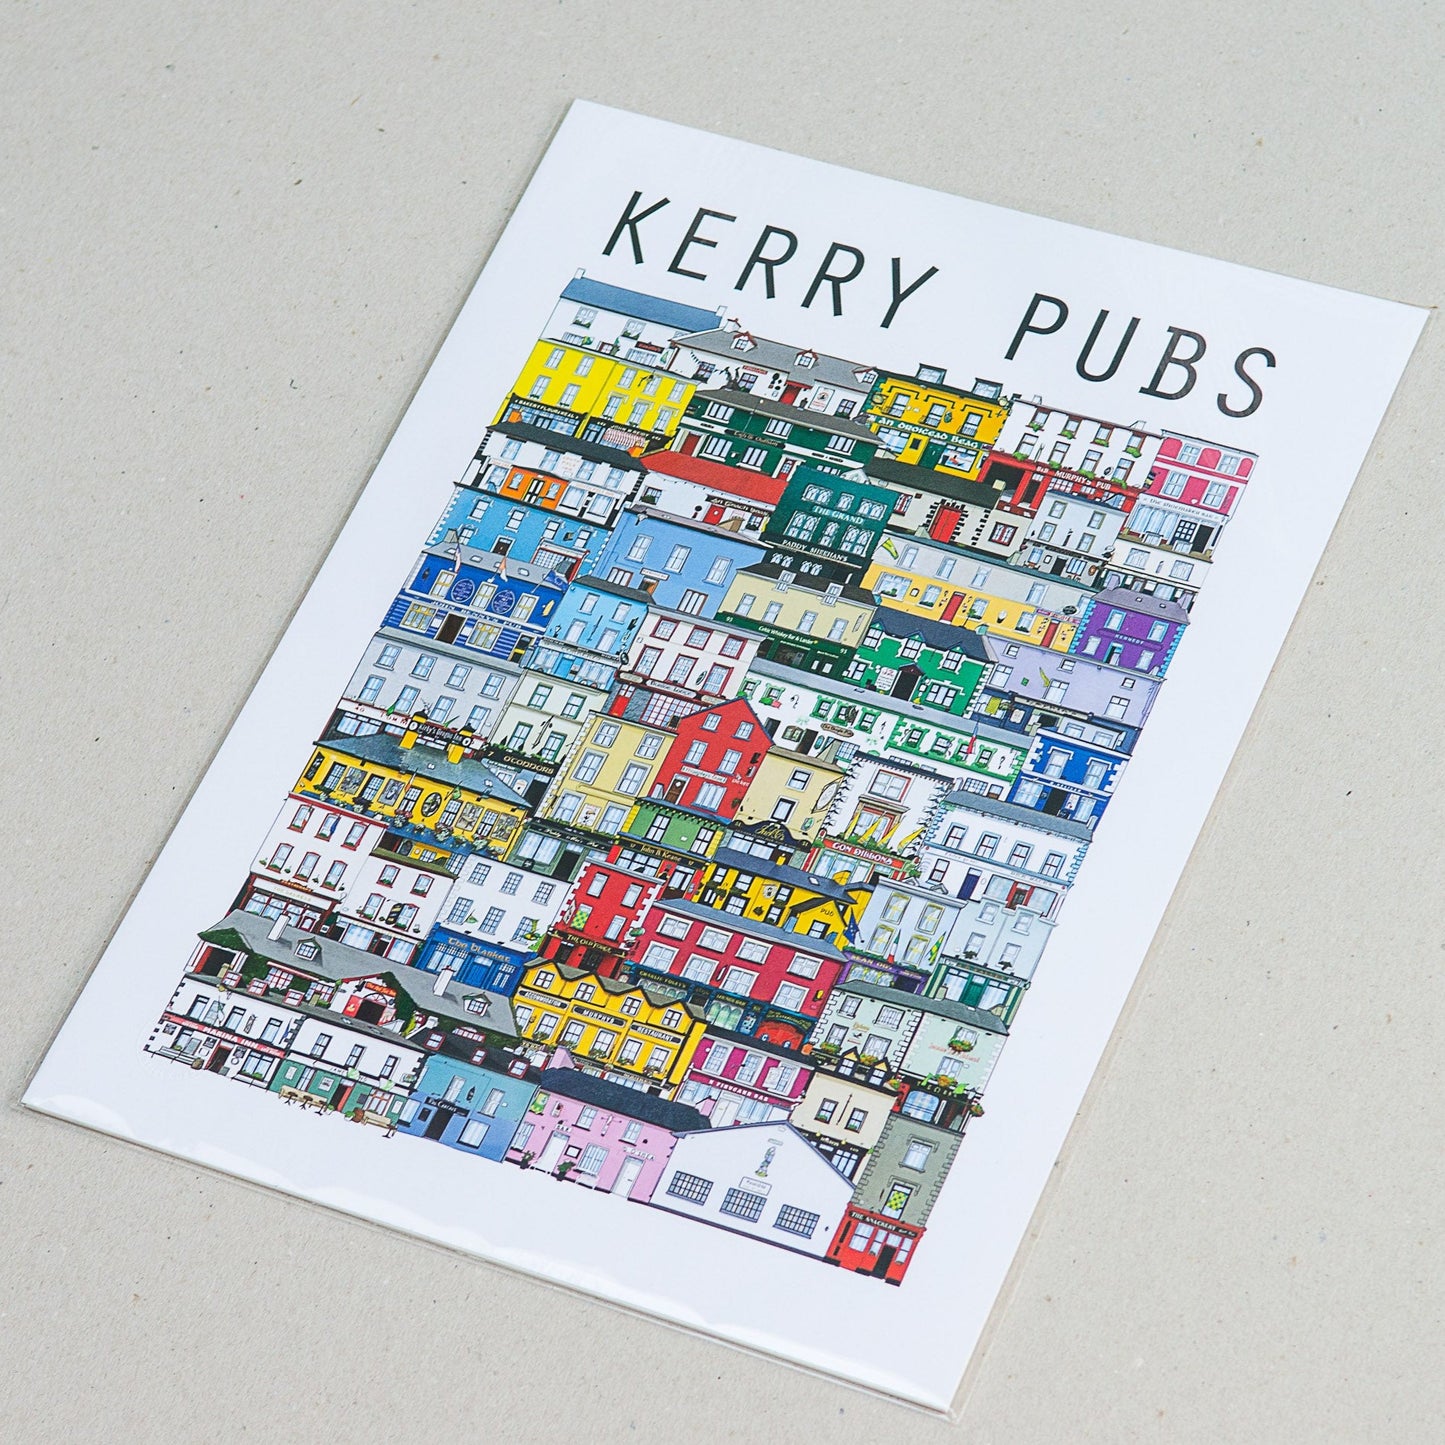 Kerry Pubs 1st Edition